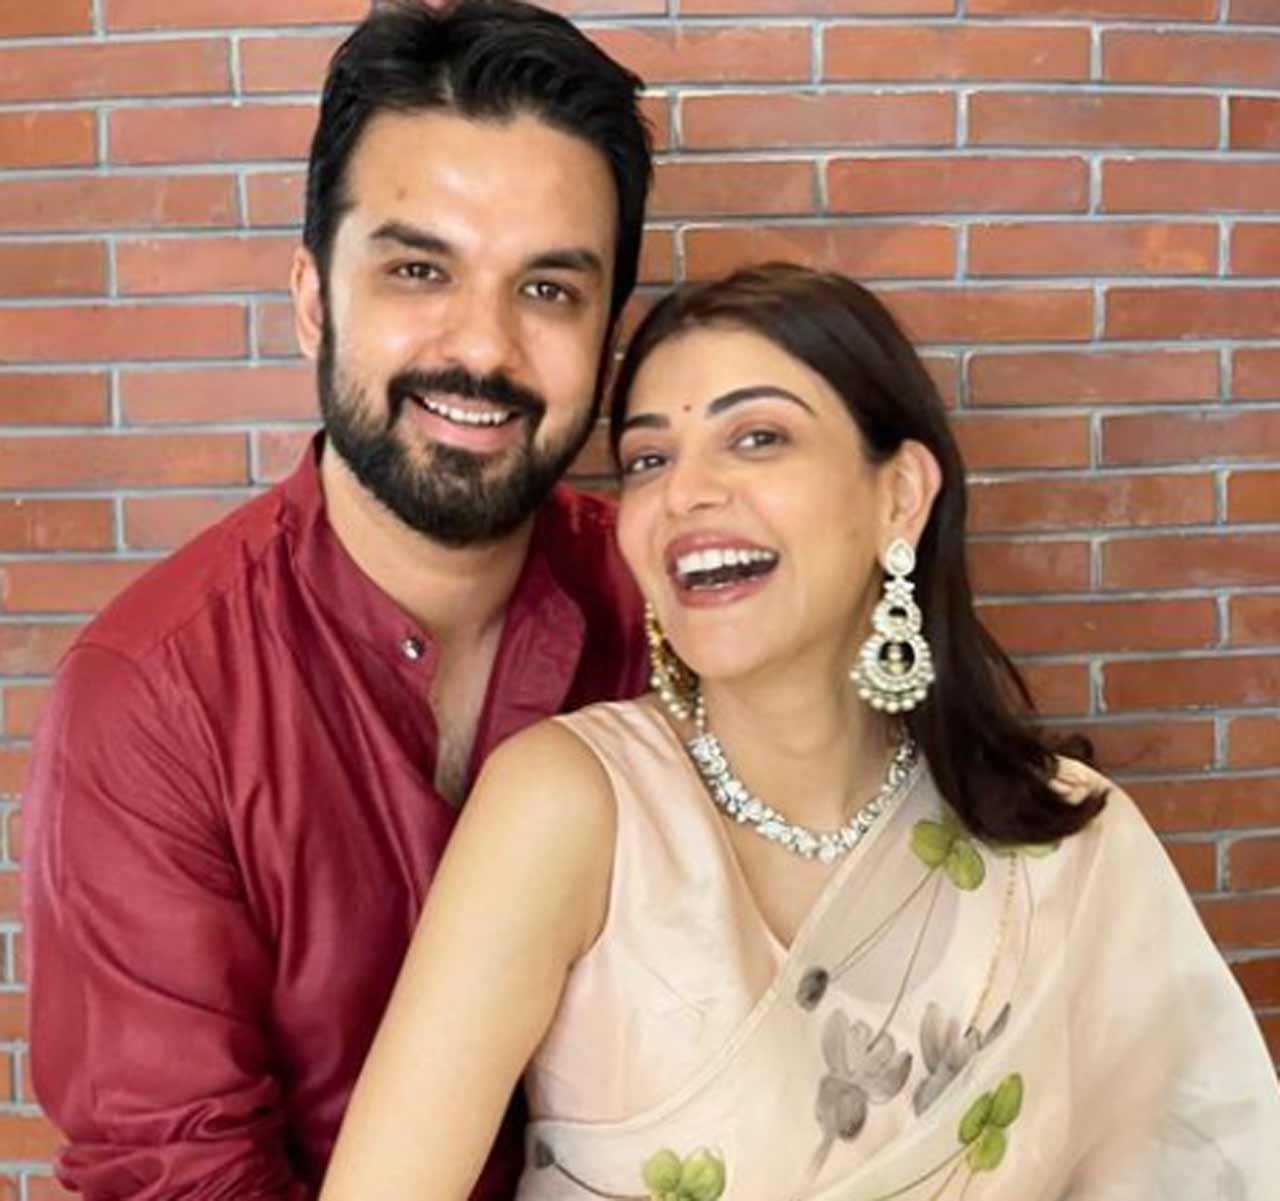 In October 2019, Kajal Aggarwal revealed that she plans to get married soon. The actress opened up about her plans to settle down during a conversation with Lakshmi Manchu on VOOT's Feet Up with the Stars Telugu. The actress tied the knot with a businessman Gautam Kitchlu and the duo was blessed with a baby boy earlier this year. They named him Neil